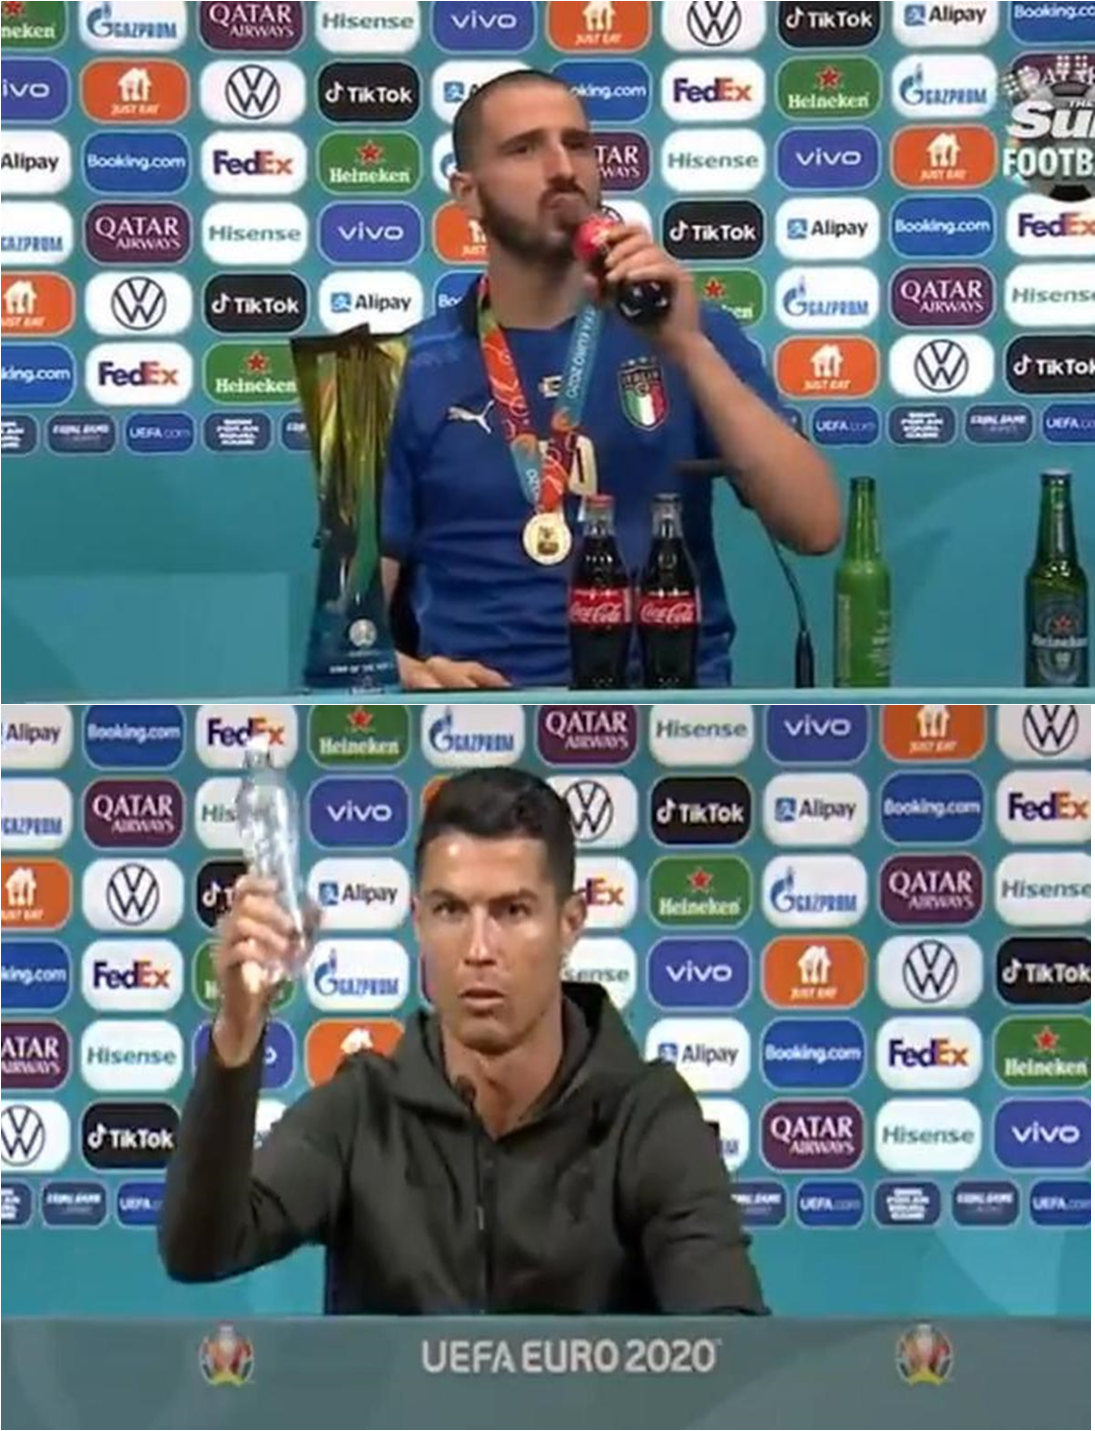 High Quality The Real chamions Blank Meme Template